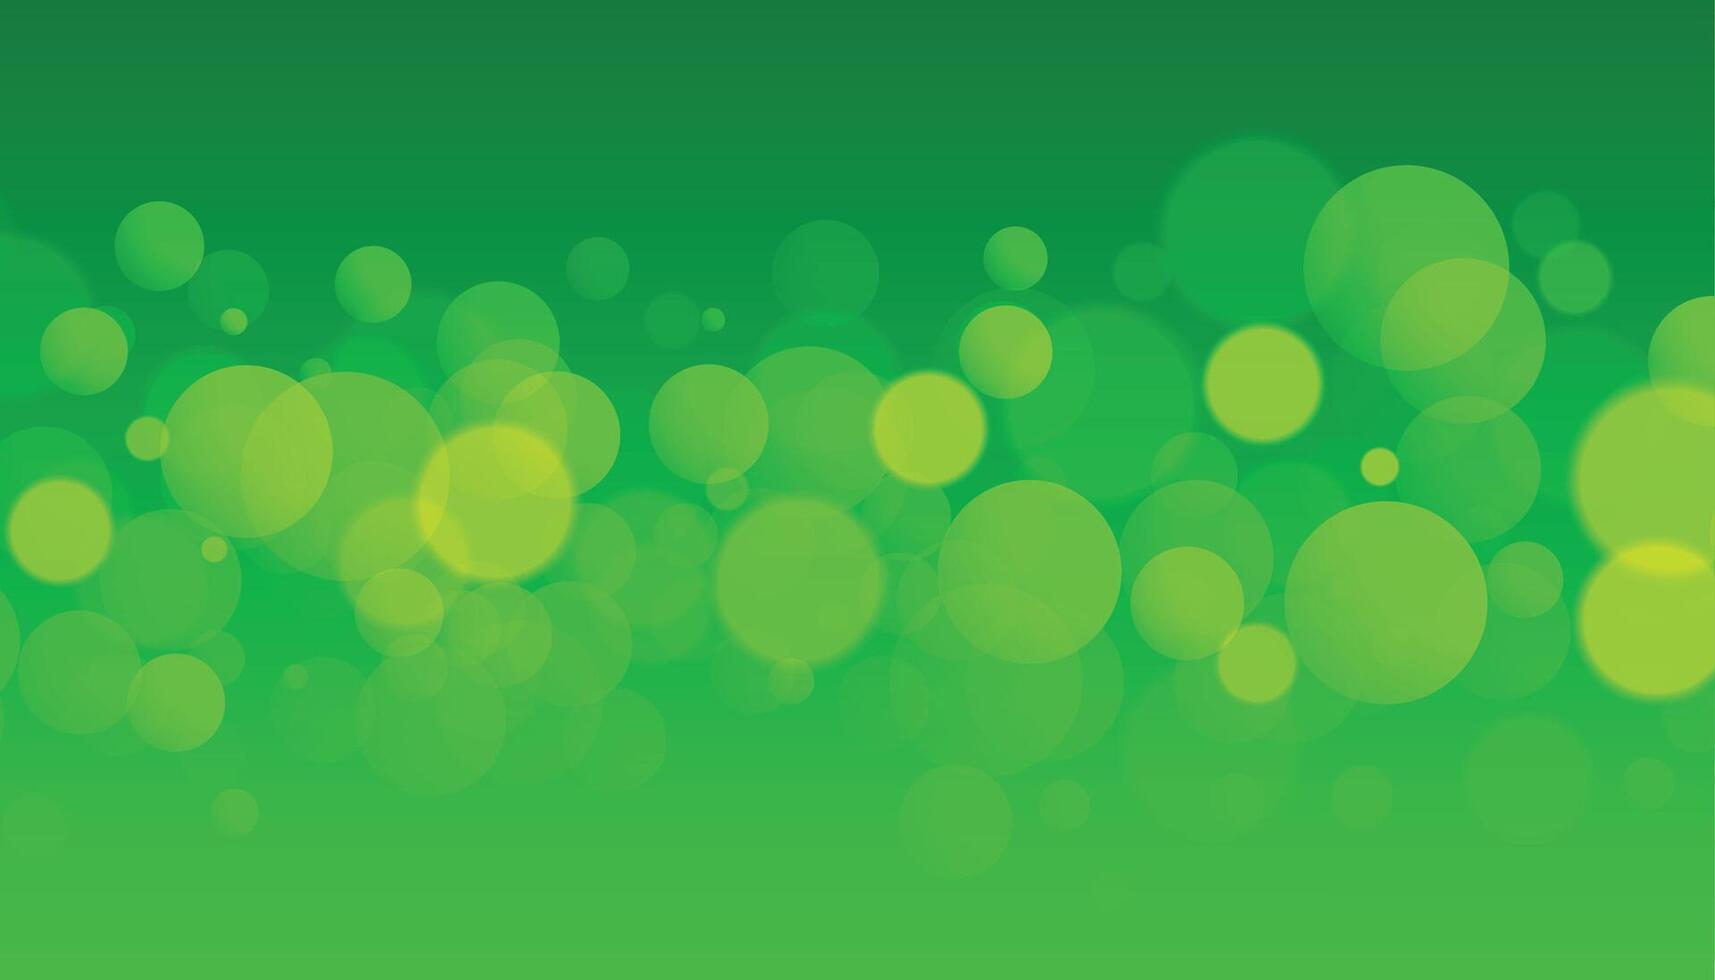 abstract blurred pattern green banner with bokeh effect vector